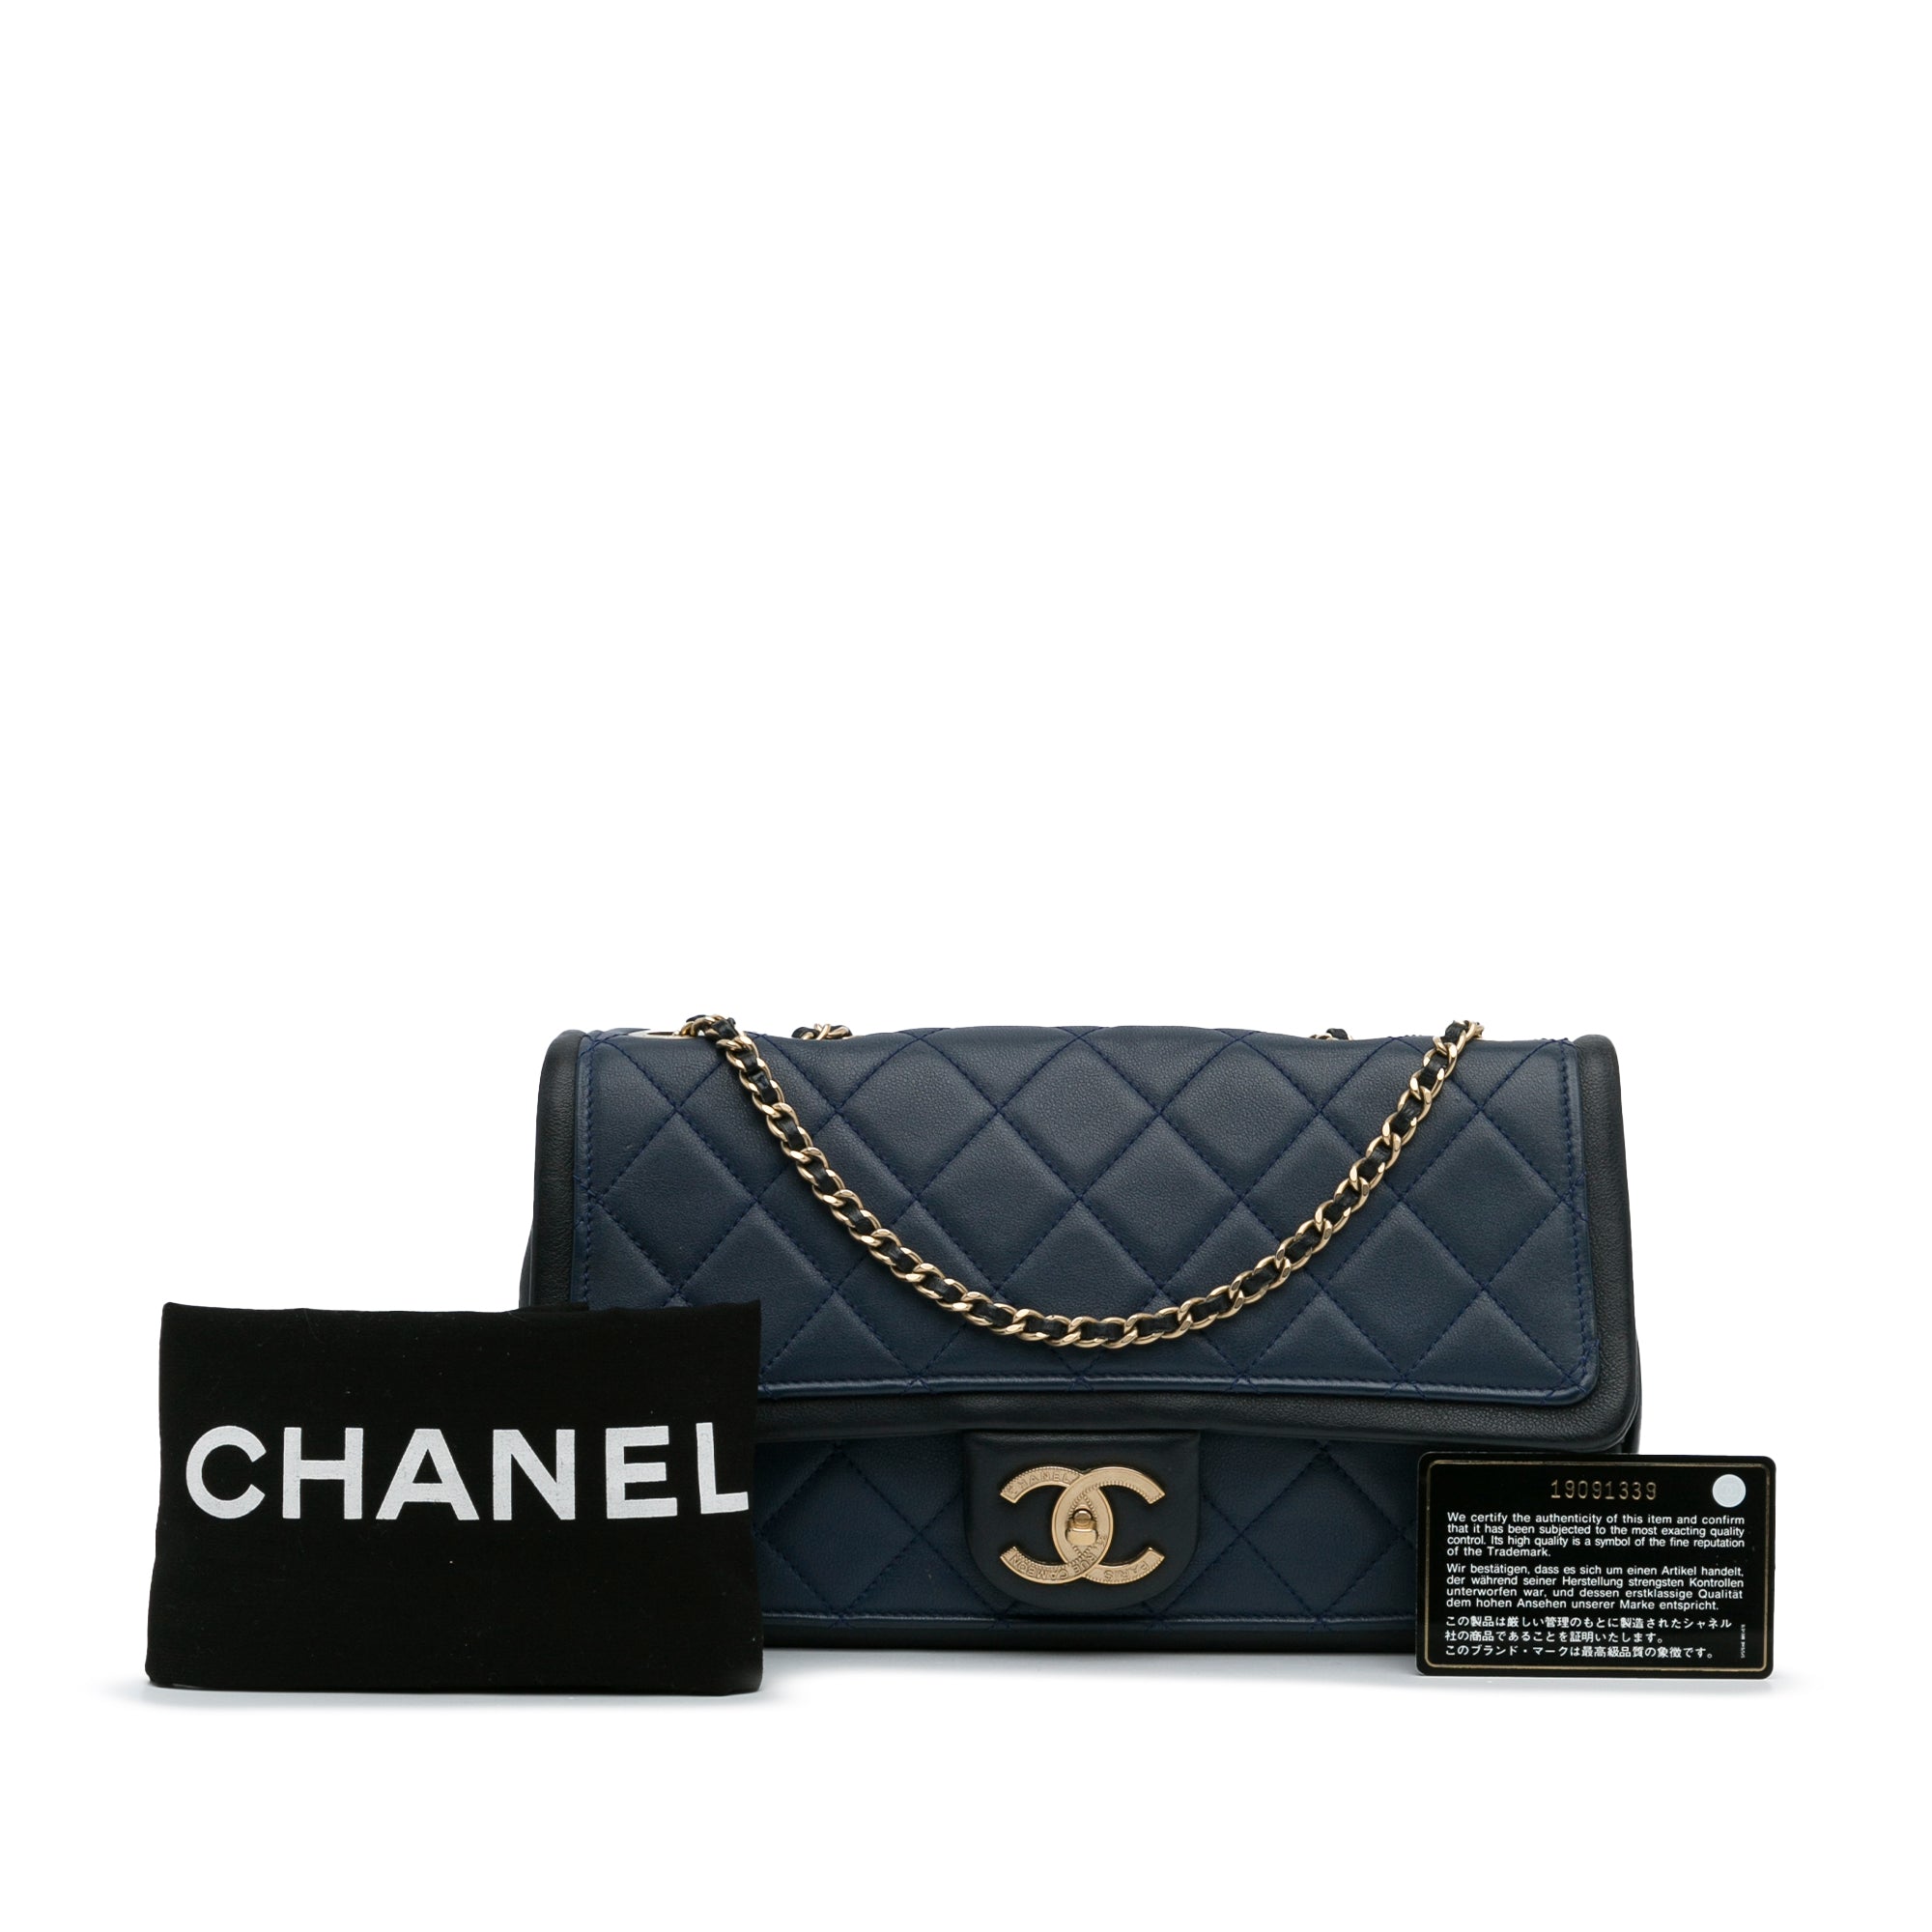 CHANEL Calfskin Quilted Medium Graphic Flap Black White | FASHIONPHILE